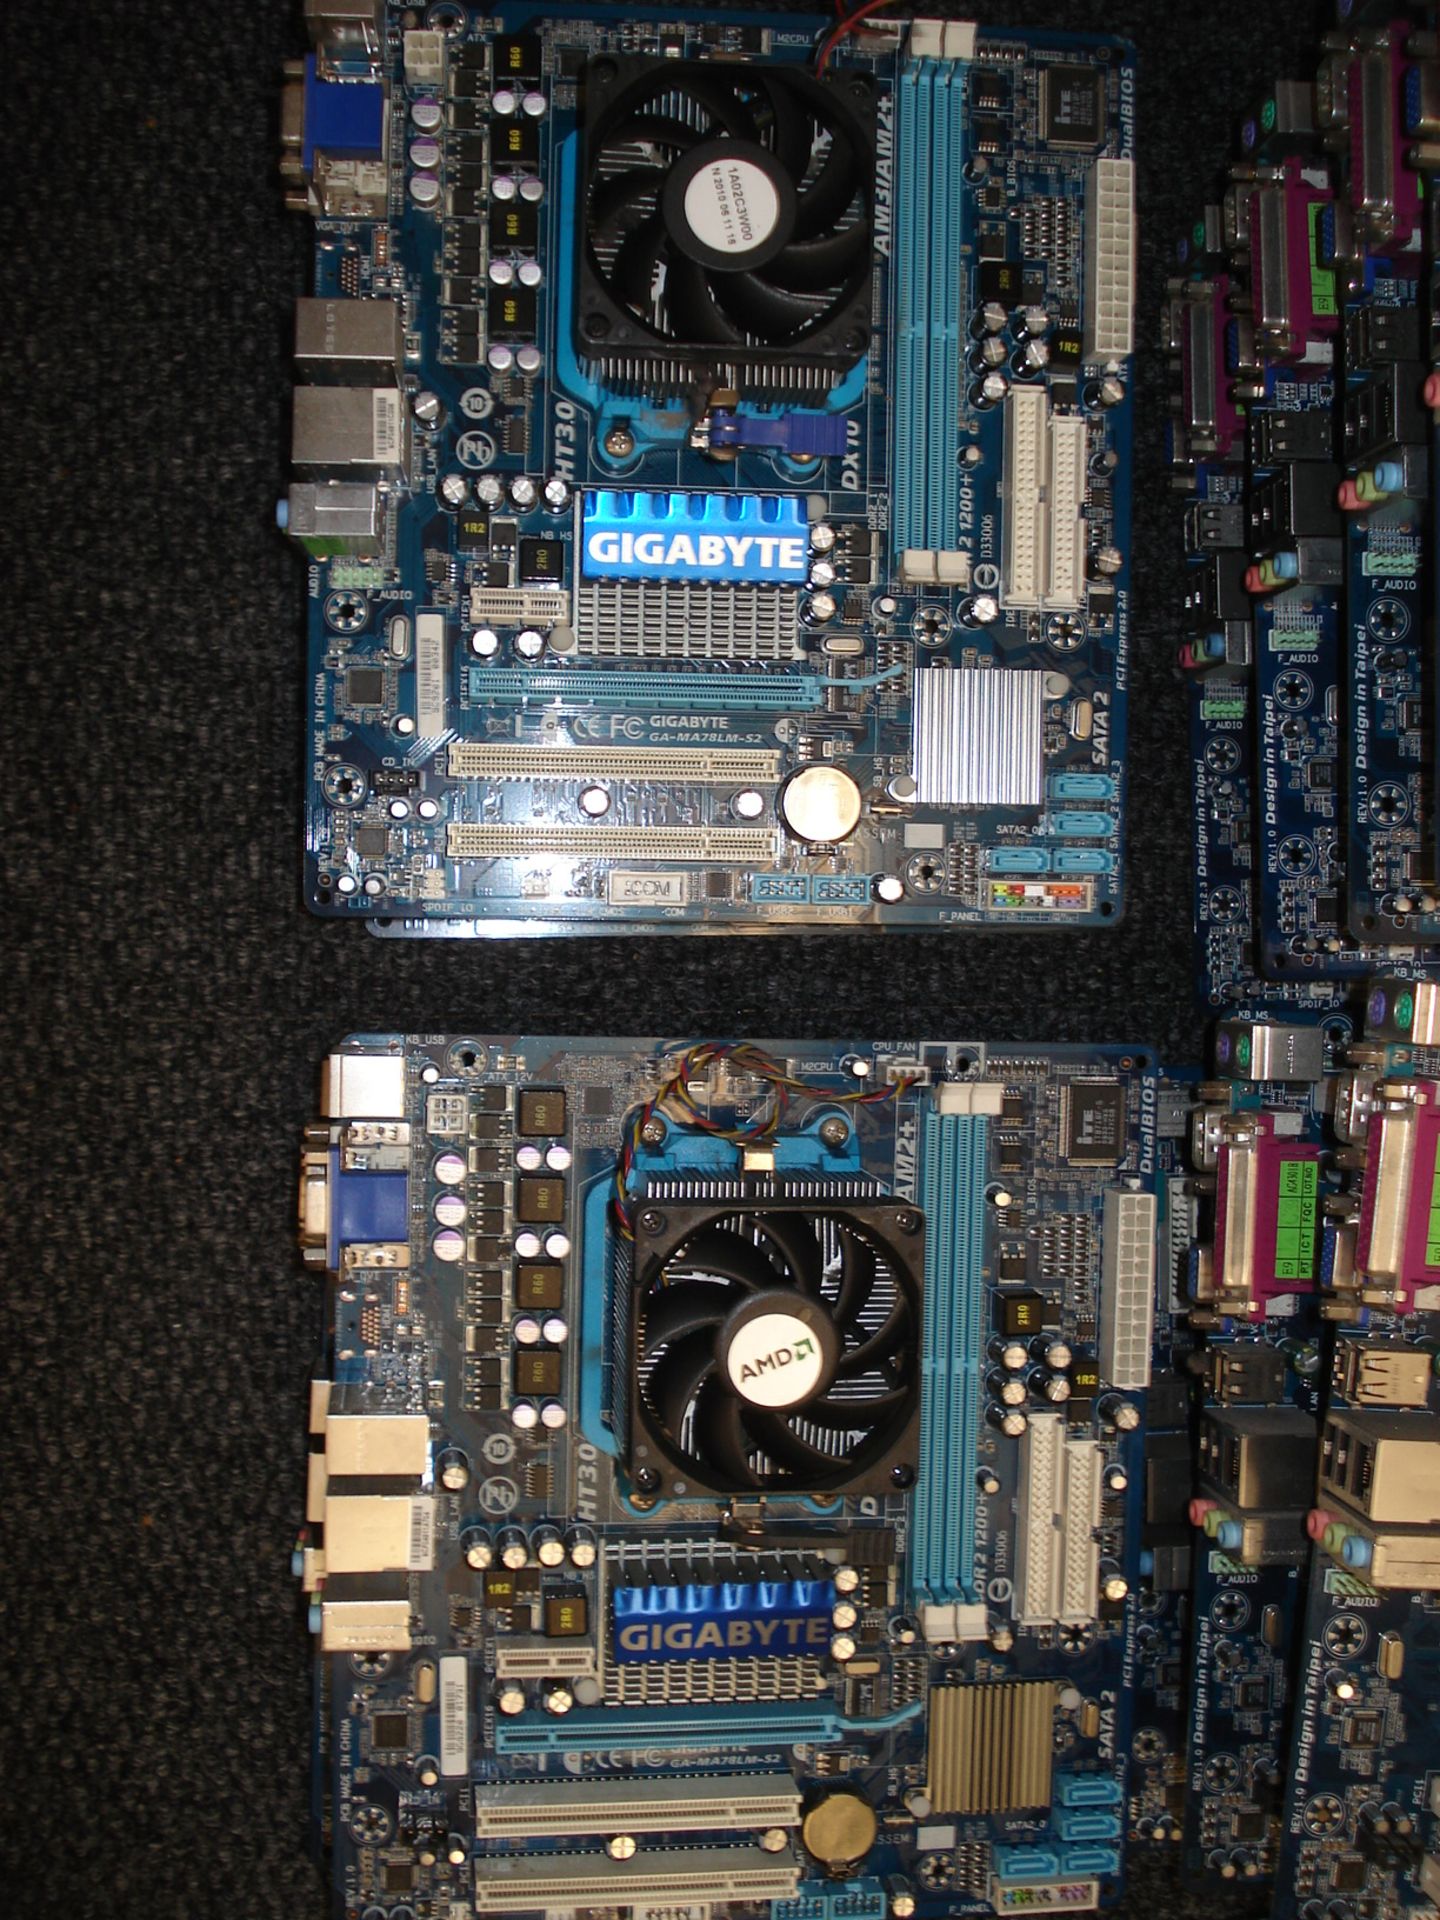 ASUS Boards - M4N68T-M LE V2 - QTY 2, M4N68T-M V2 - QTY 1, M5A7BL-M LE QTY 2, AM3 + CPU SUPPORT - - Image 4 of 12